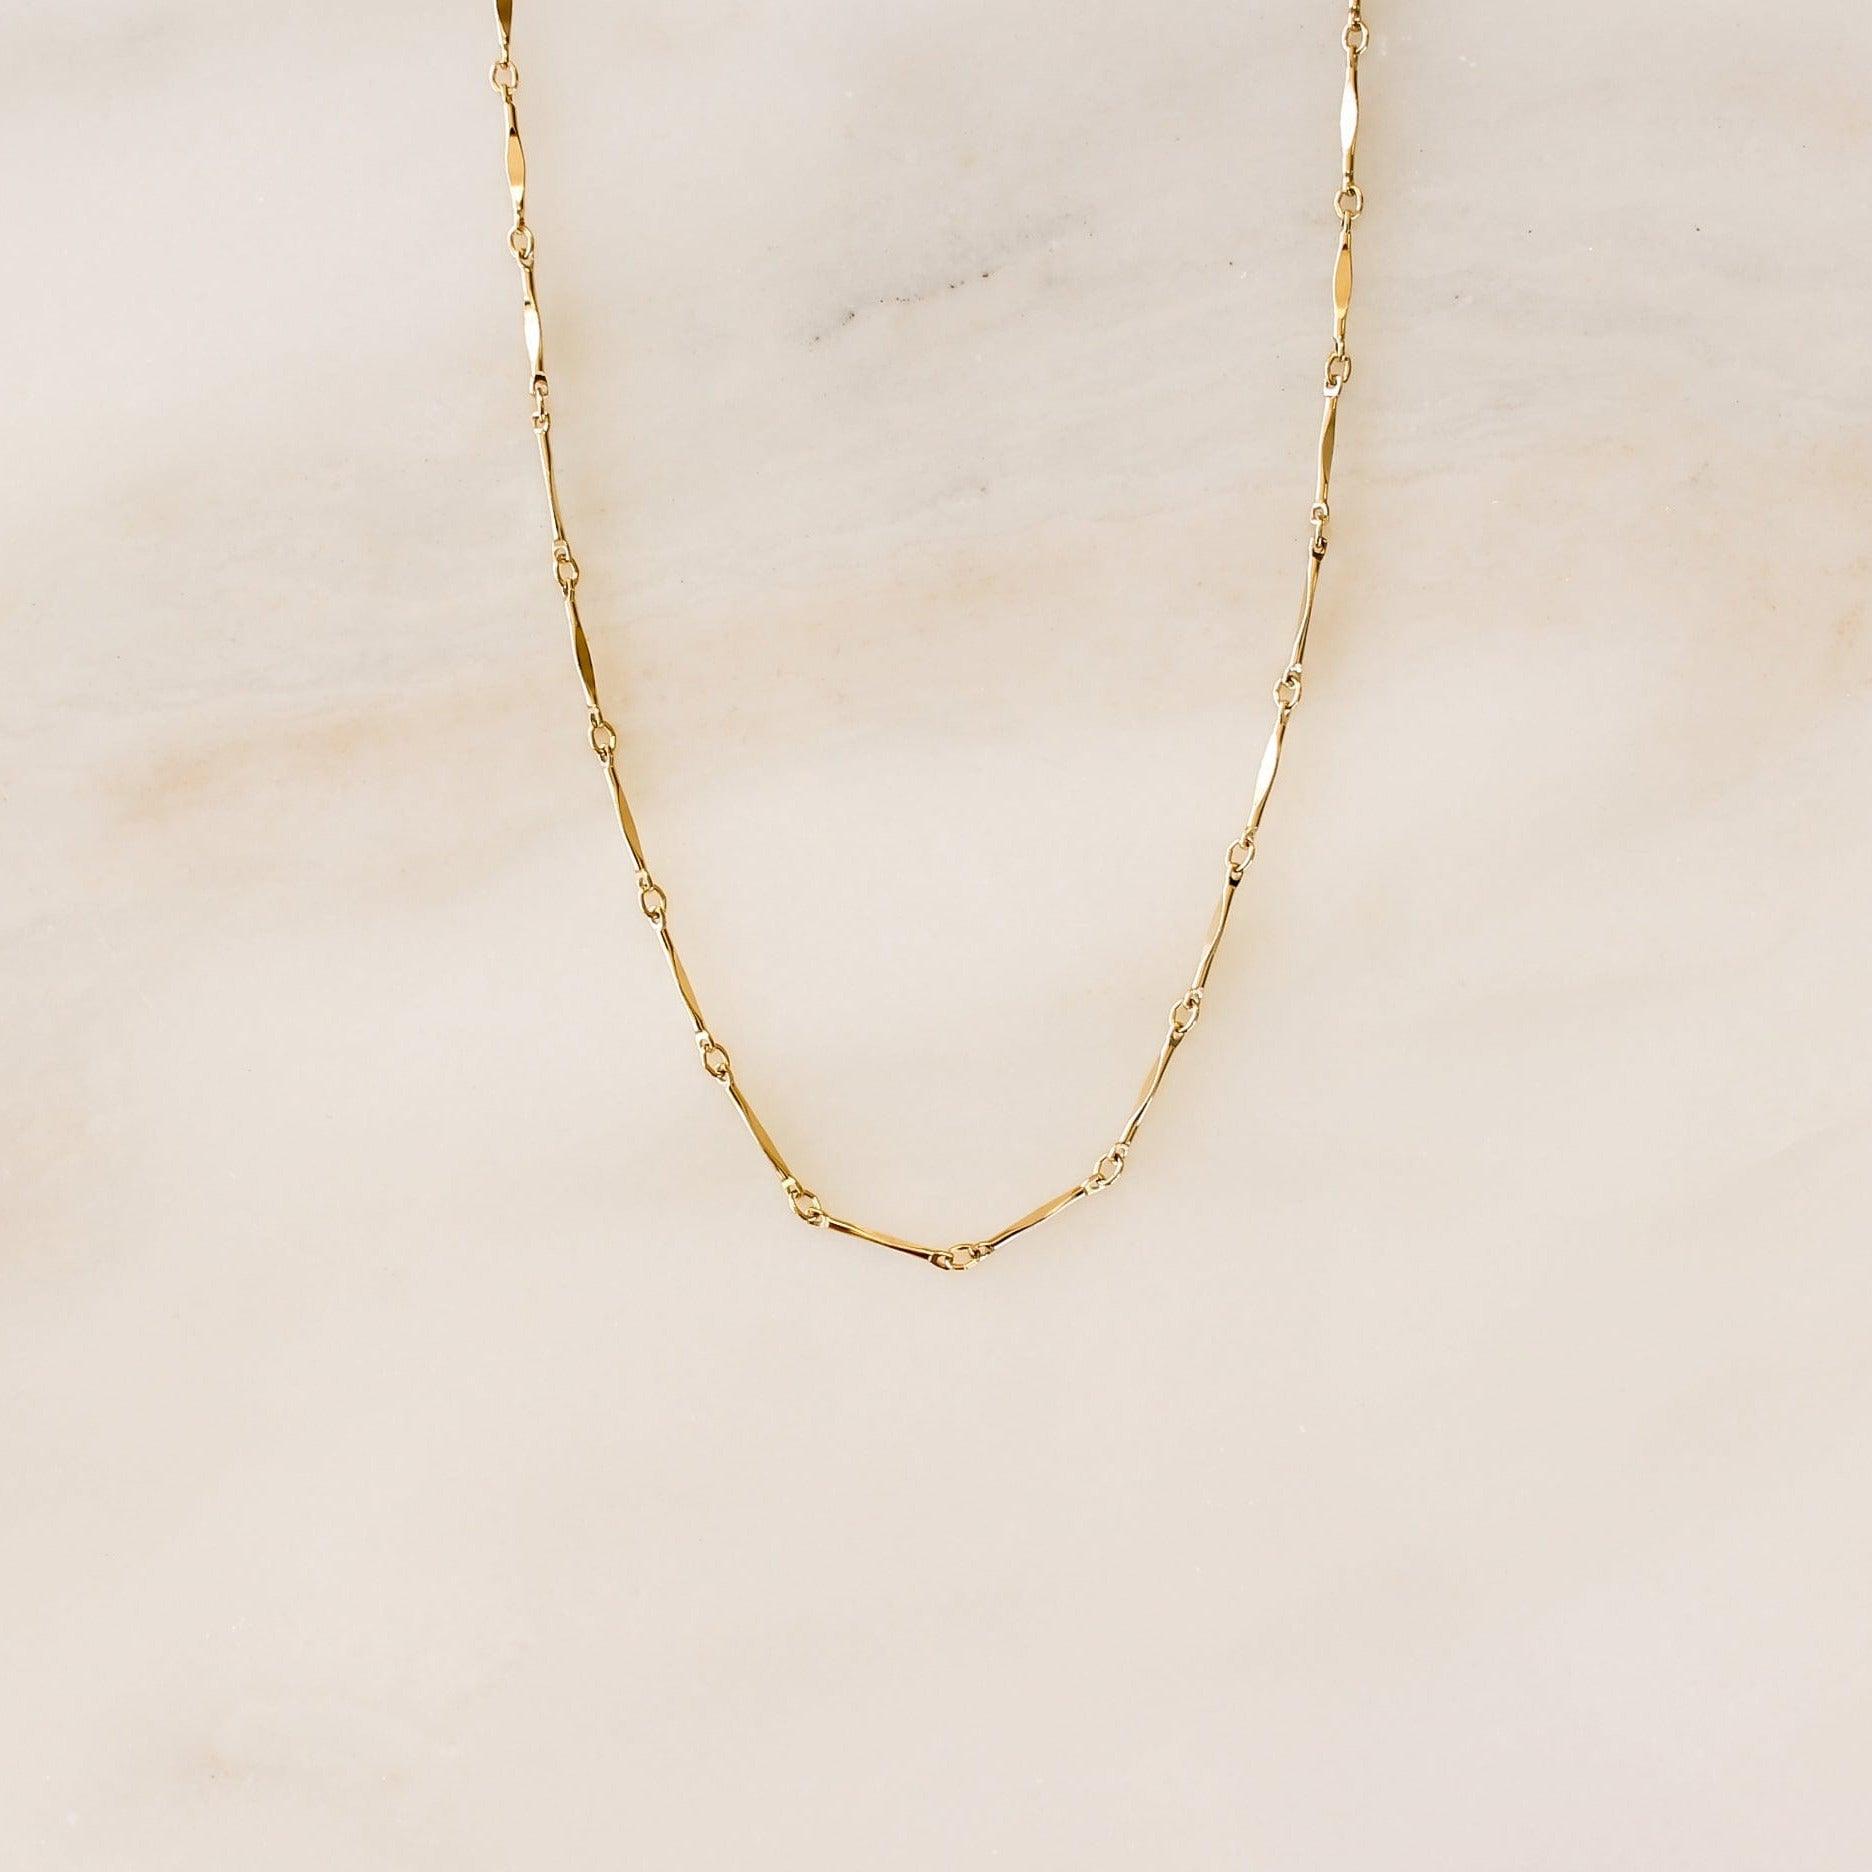 Parker Bar Necklace - Nolia Jewelry - Meaningful + Sustainably Handcrafted Jewelry